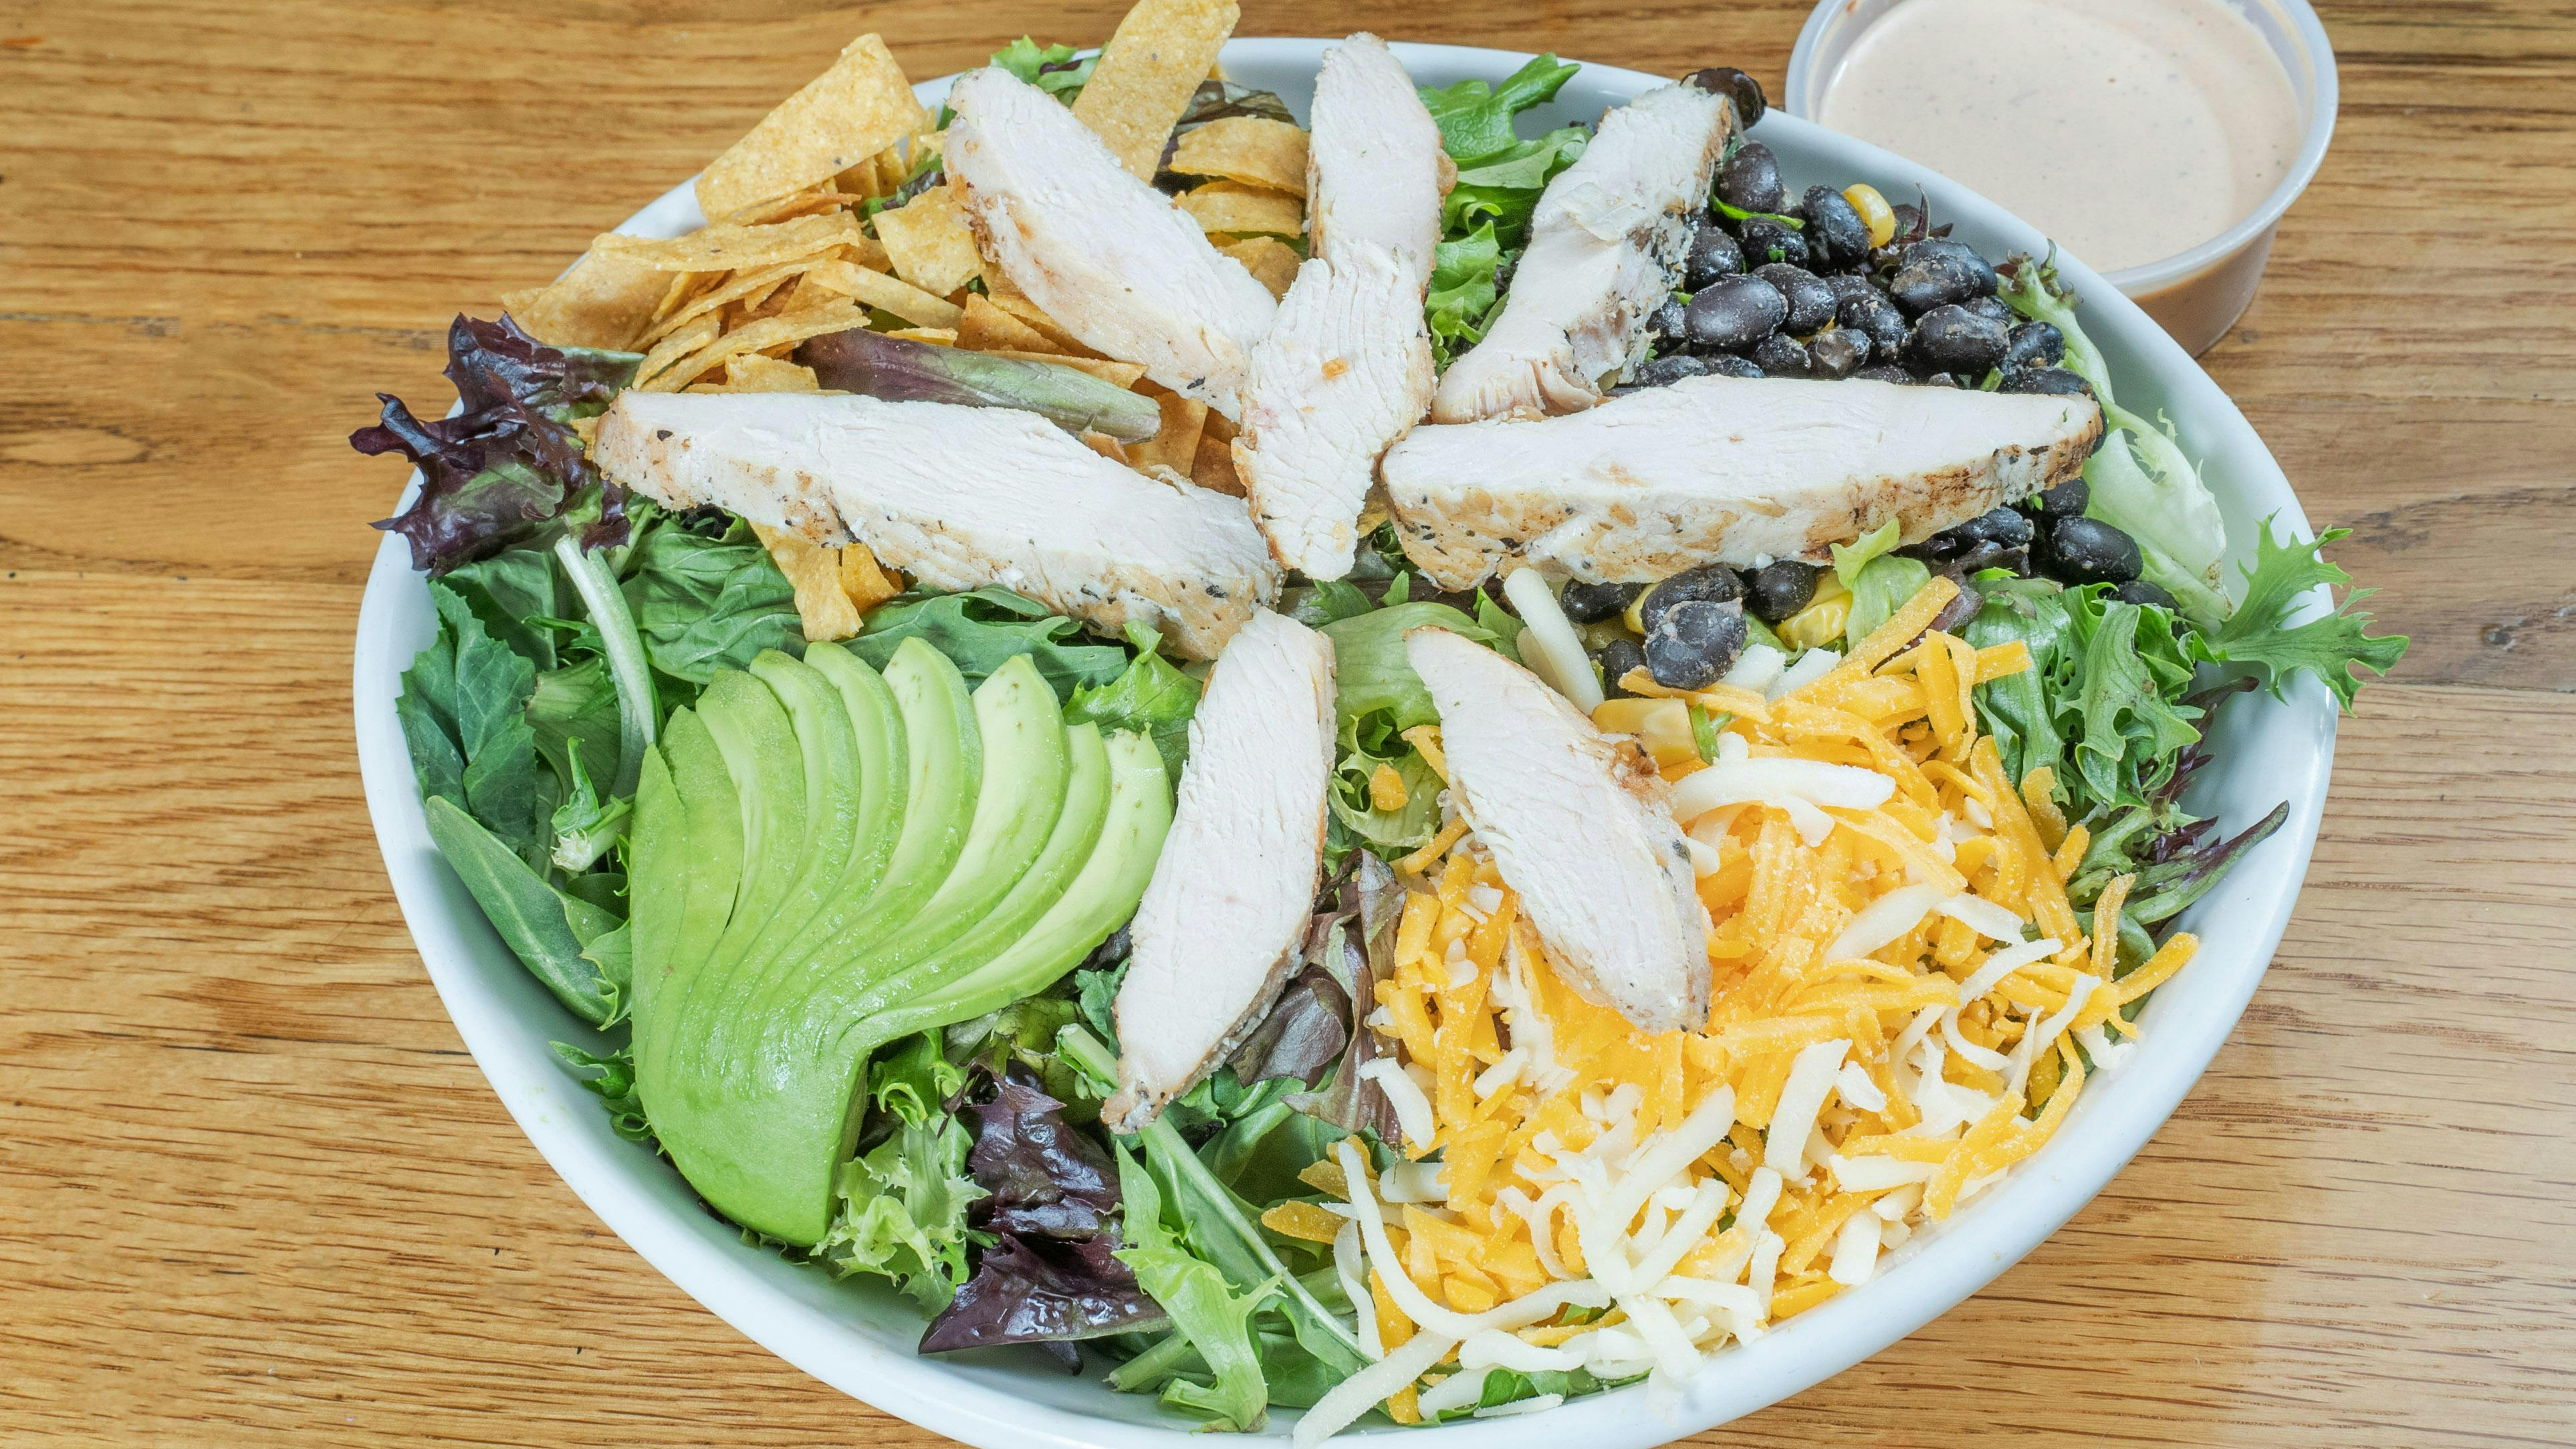 ATX Salad with Chicken from Happy Chicks - Research Blvd in Austin, TX